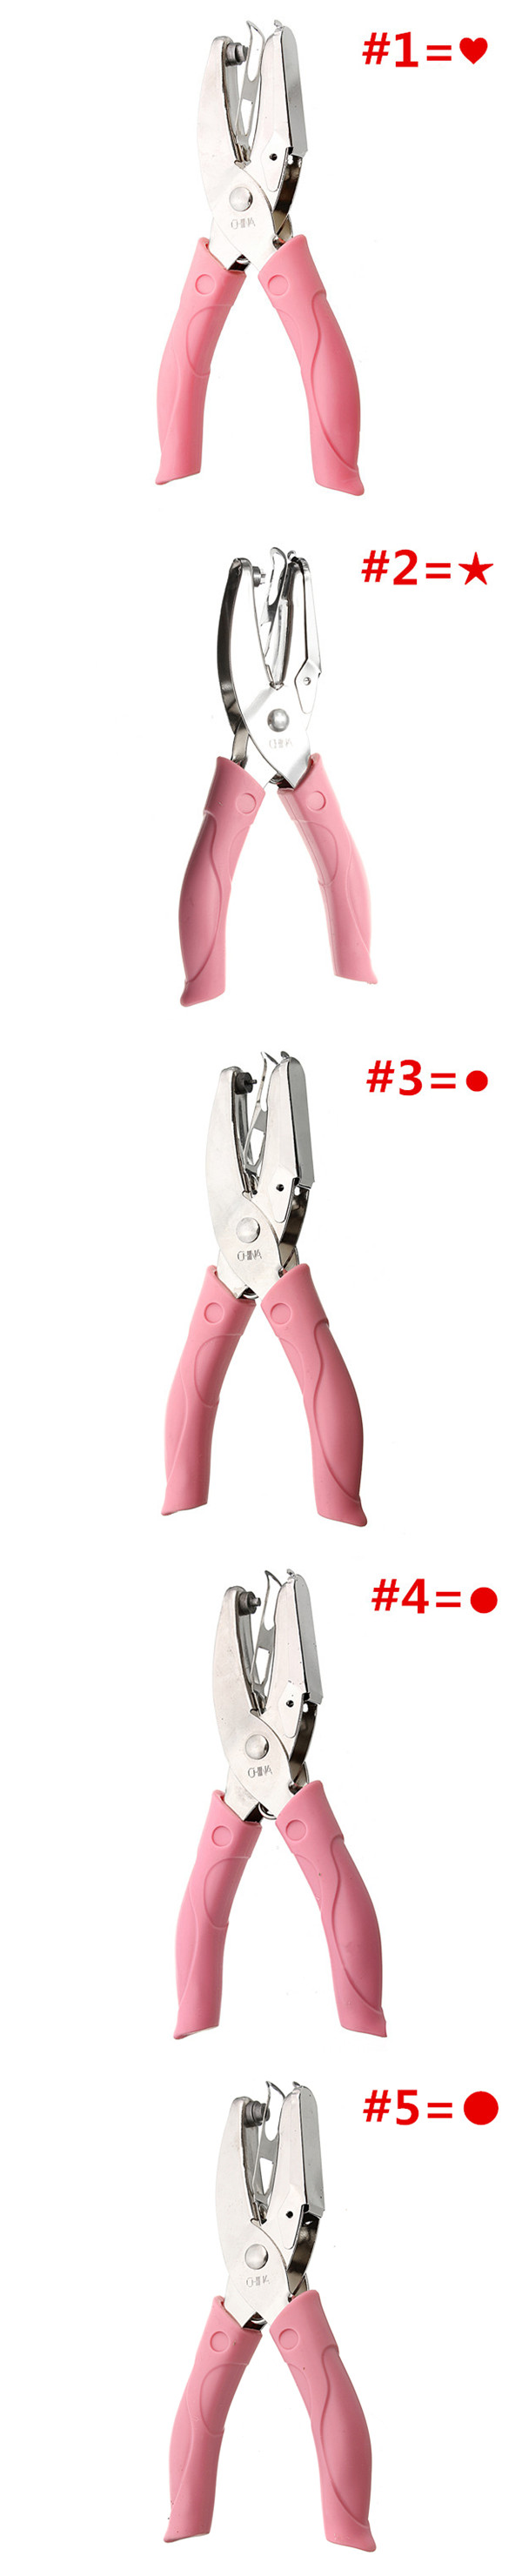 155mm-Stainless-Steel-Manual-Hole-Puncher-Pliers-DIY-Hand-Tool---5-Size-1089892-5